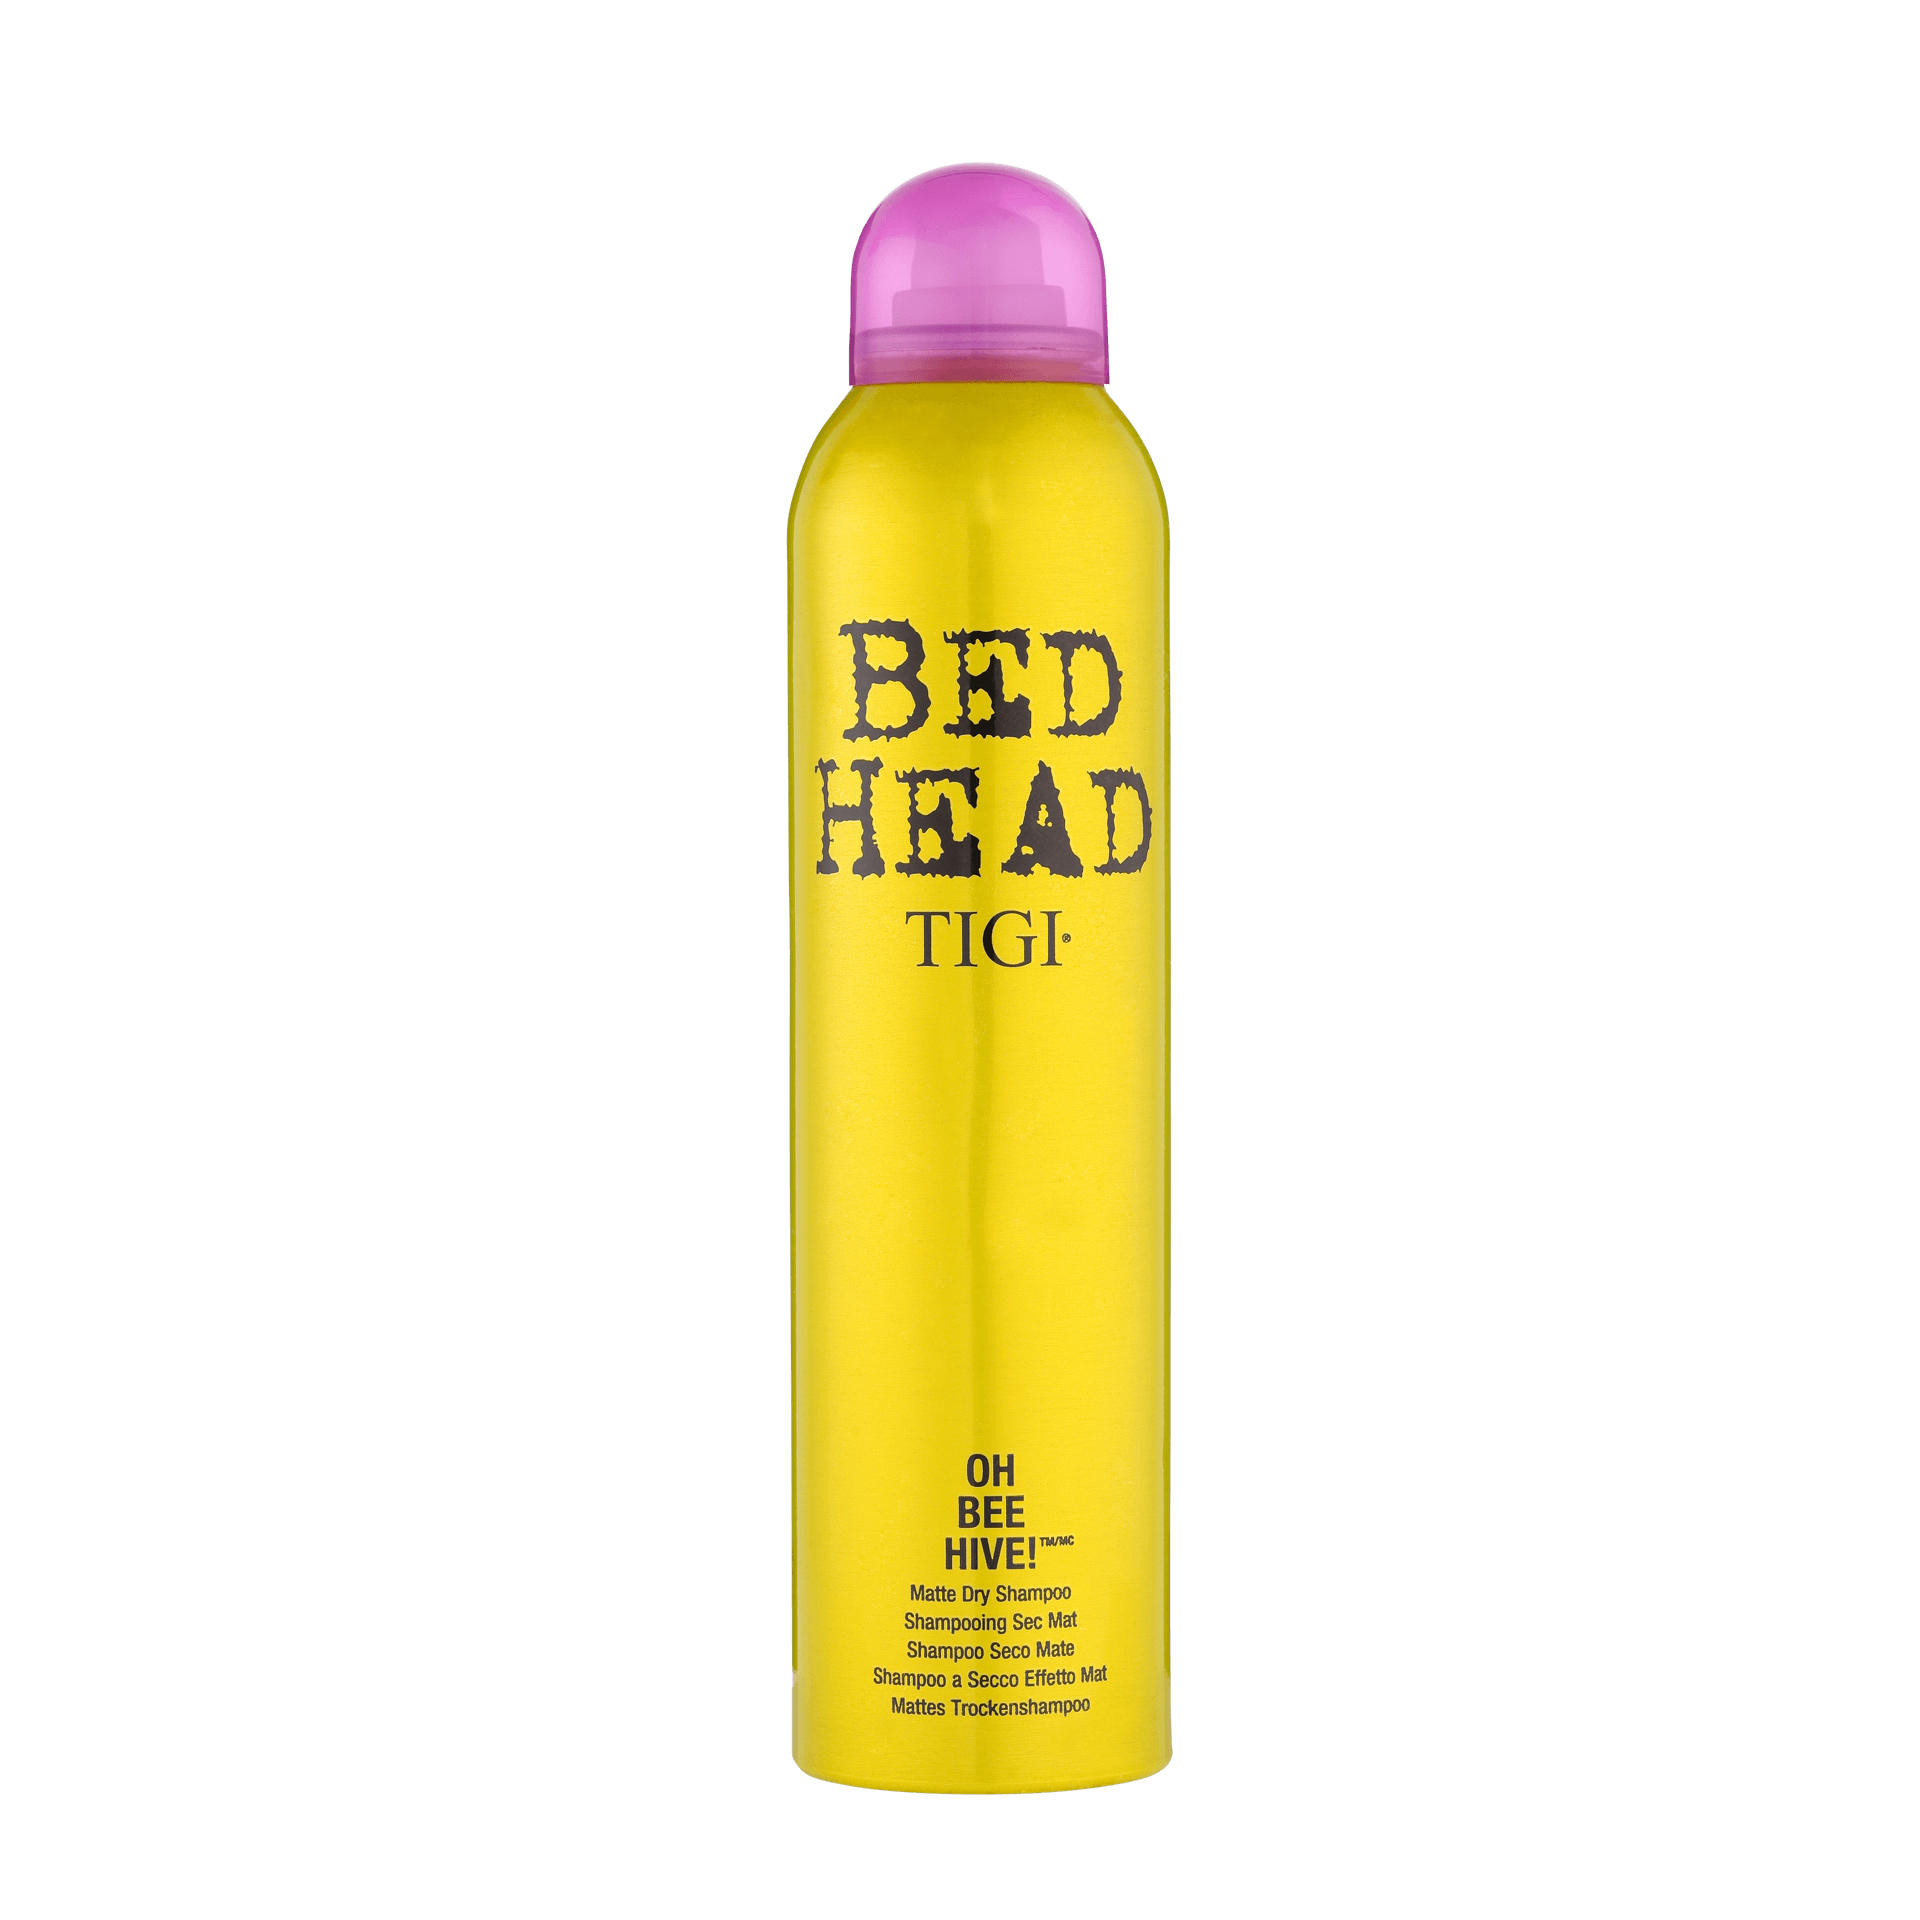 BED HEAD BY TIGI OH BEE HIVE! DRY SHAMPOO front view